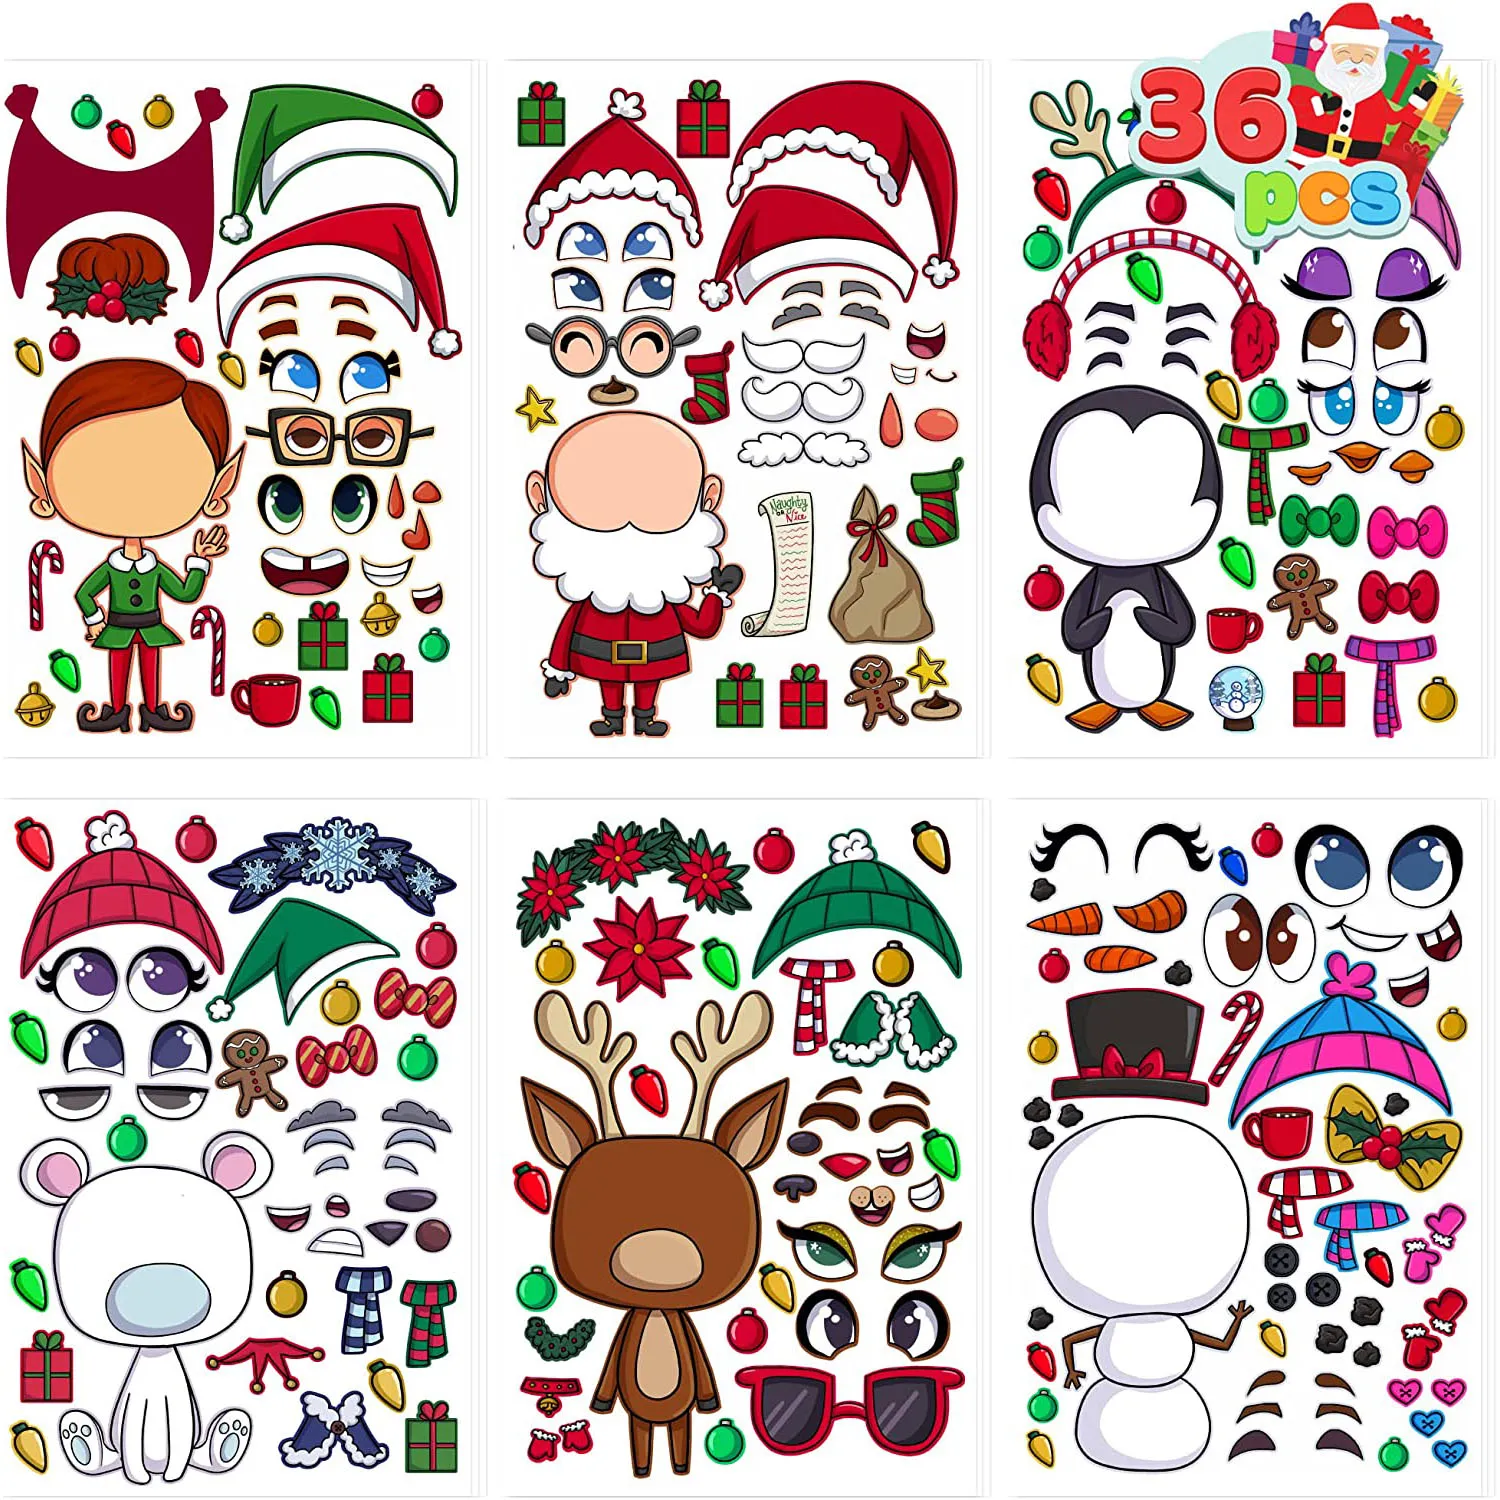 36 Pcs Make-a-Face Sticker Sheets Make Your Own Christmas Characters Mix and Match Sticker Sheets with Full Body Design Reindeer, Snowman, Elf and M